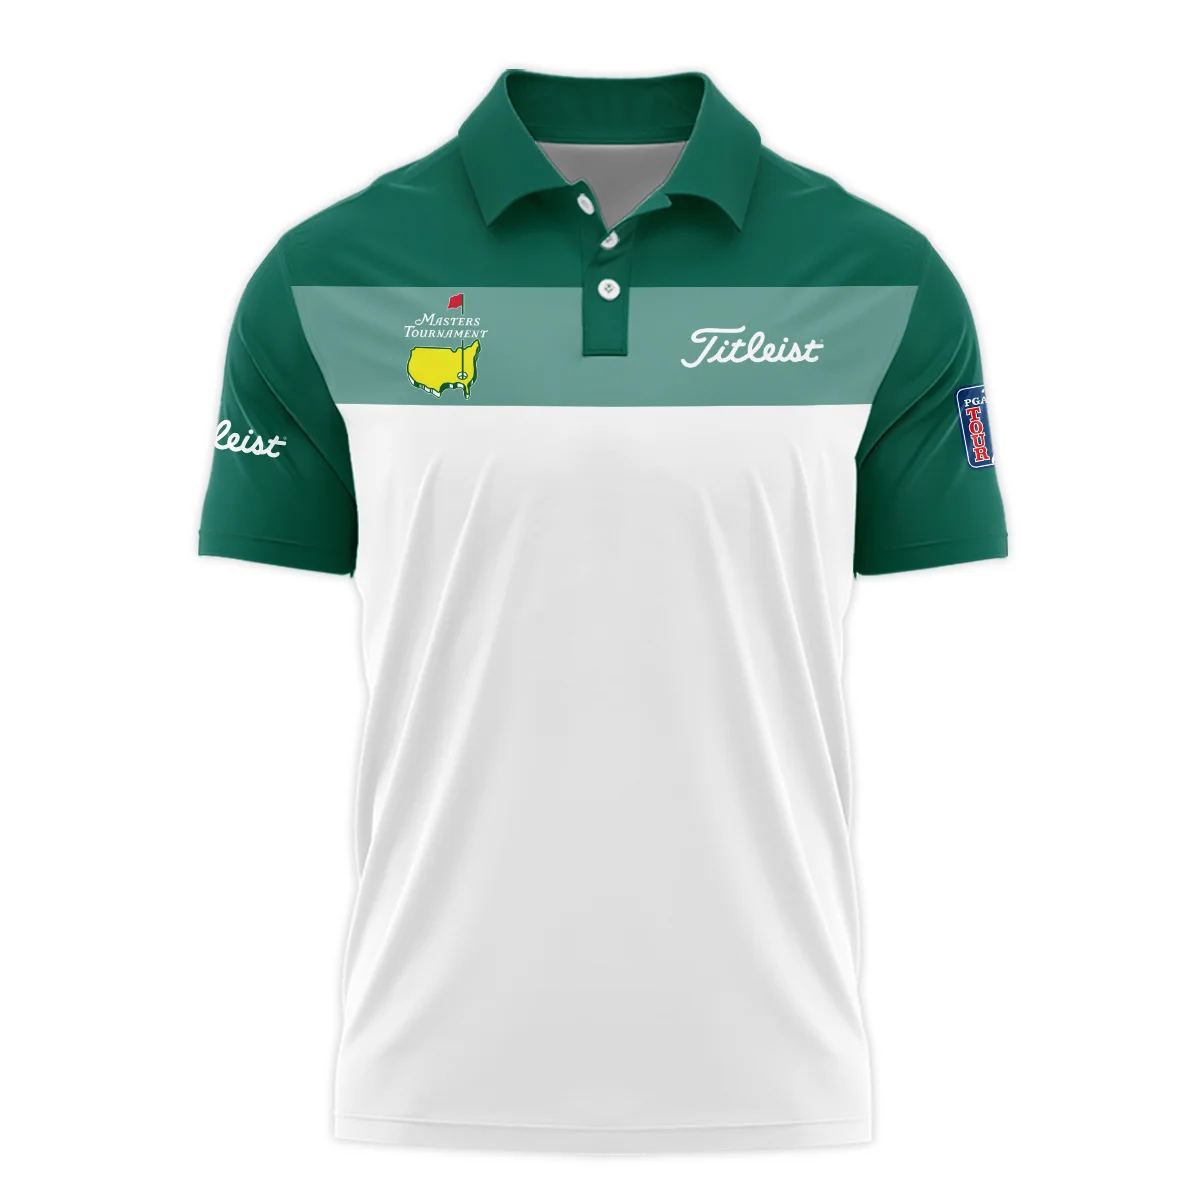 Golf Masters Tournament Titleist Polo Shirt Sports Green And White All Over Print Polo Shirt For Men